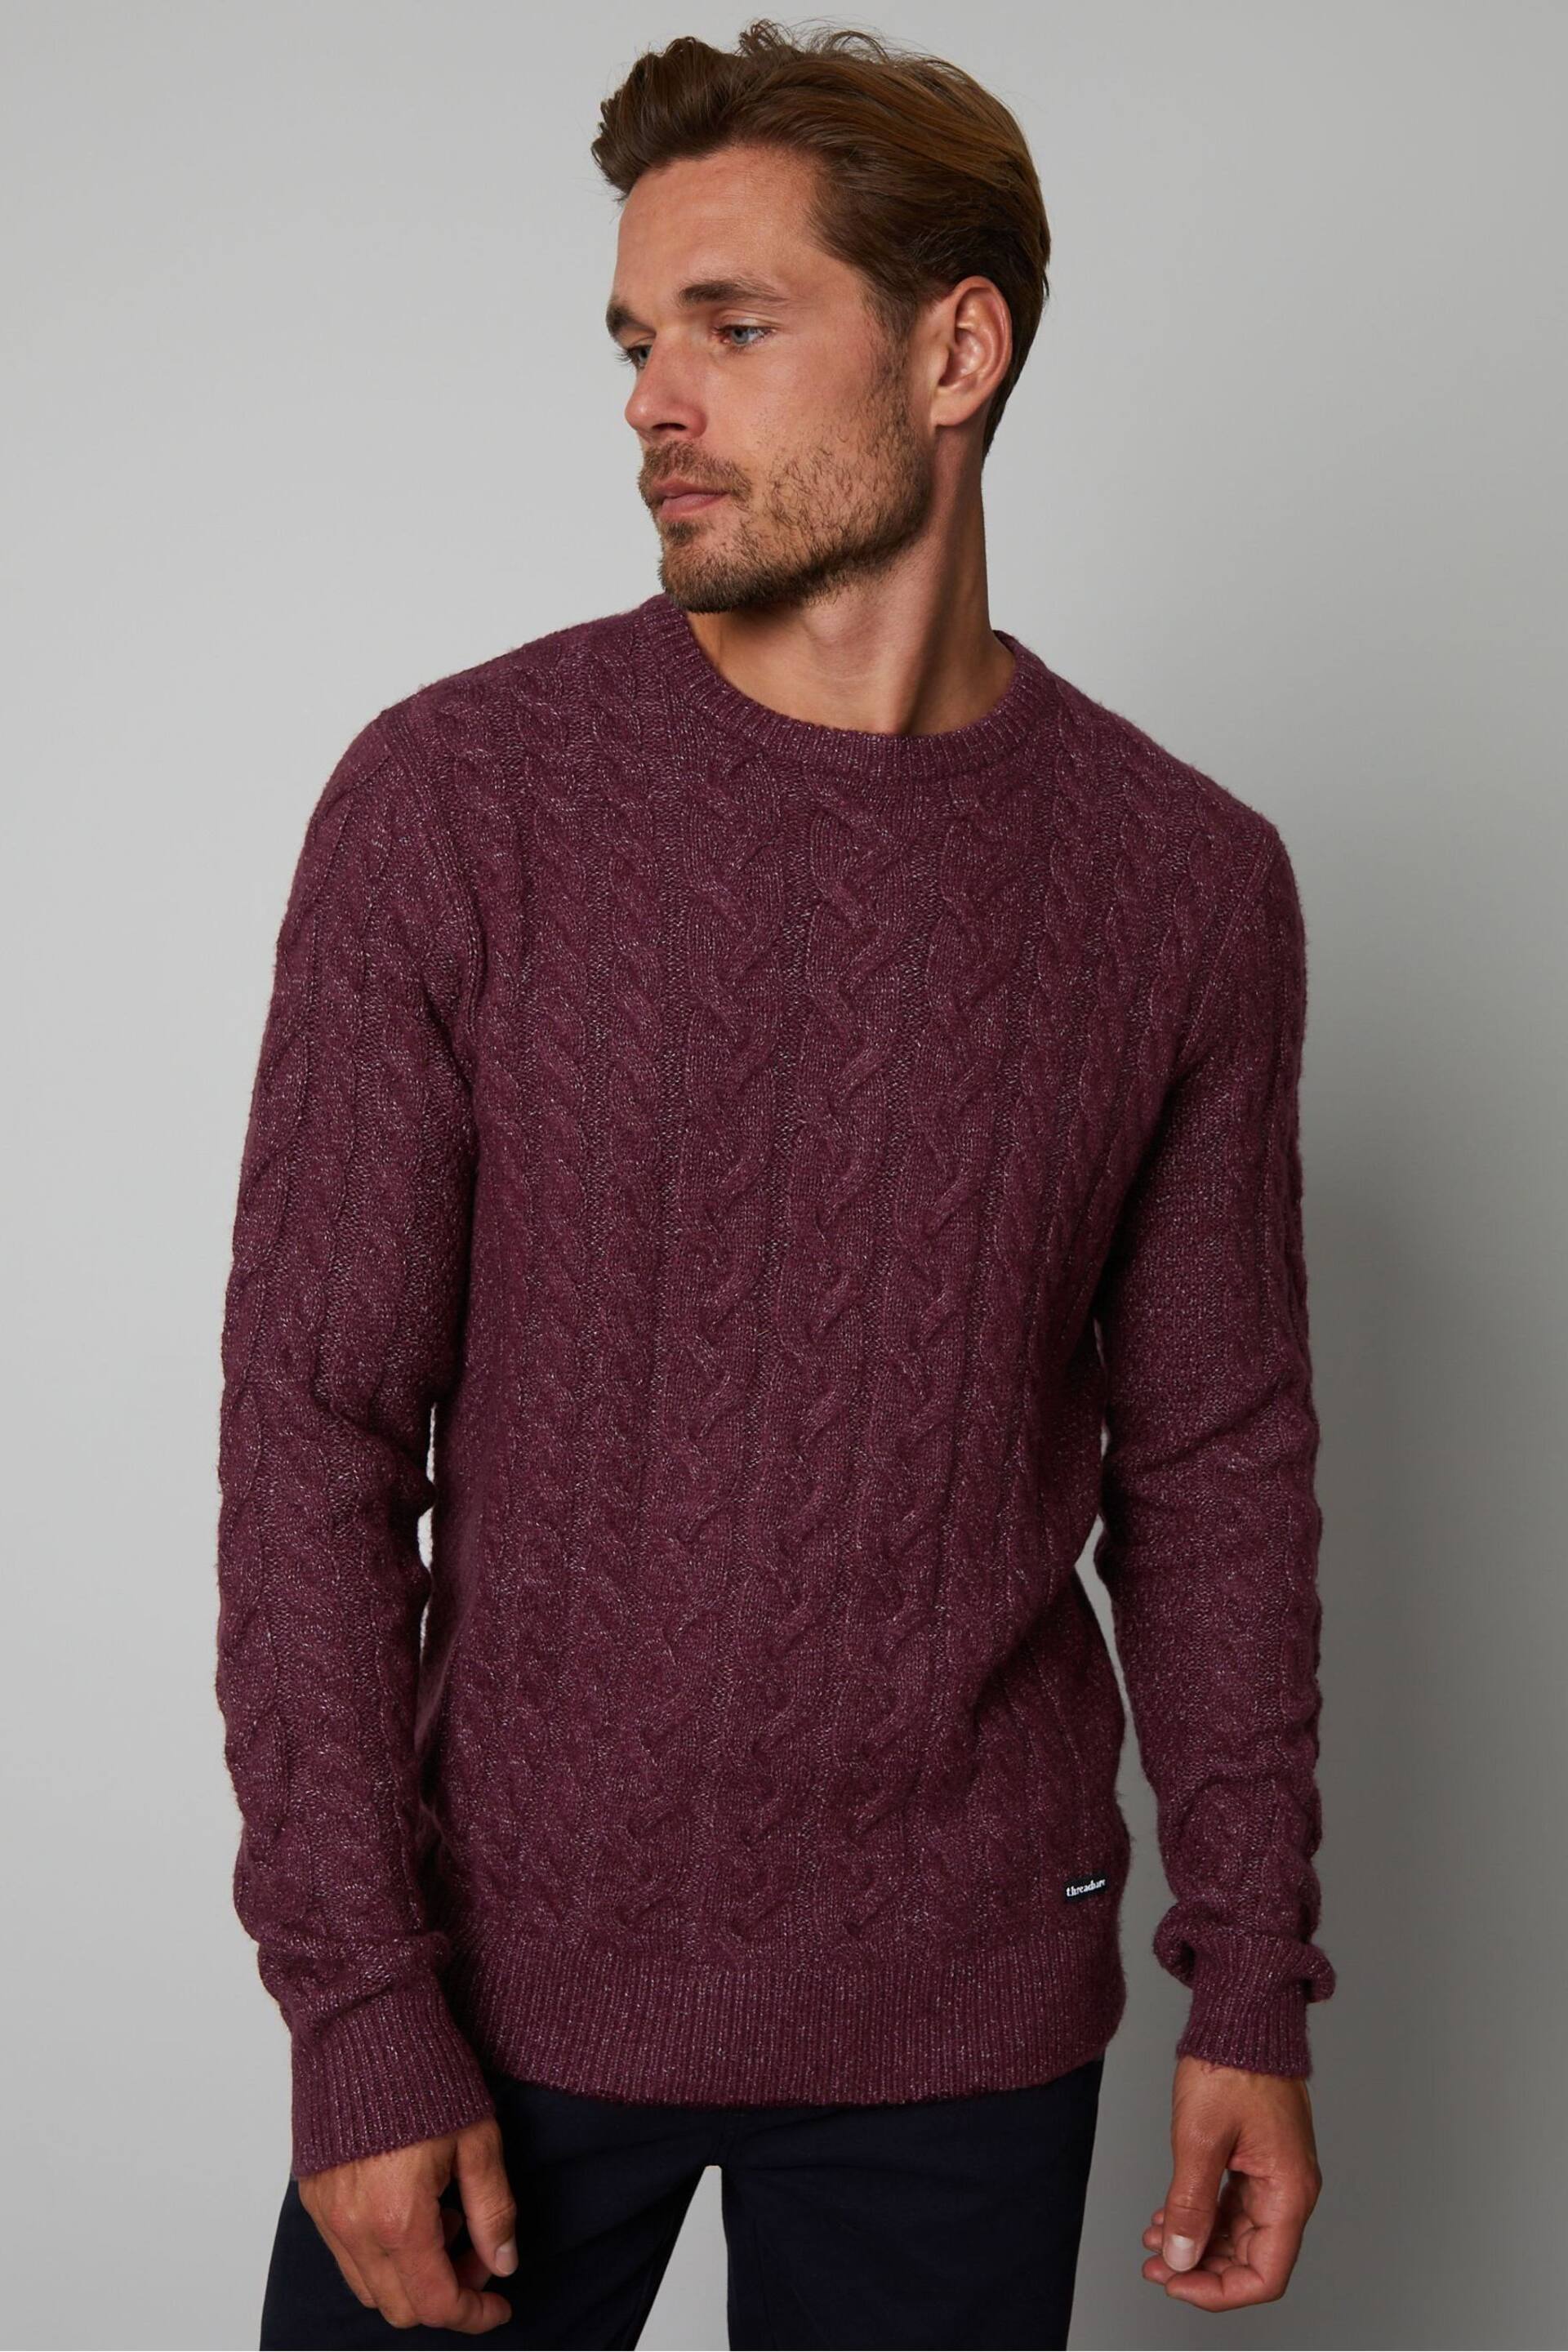 Threadbare Red Cable Knit Crew Neck Jumper - Image 1 of 4